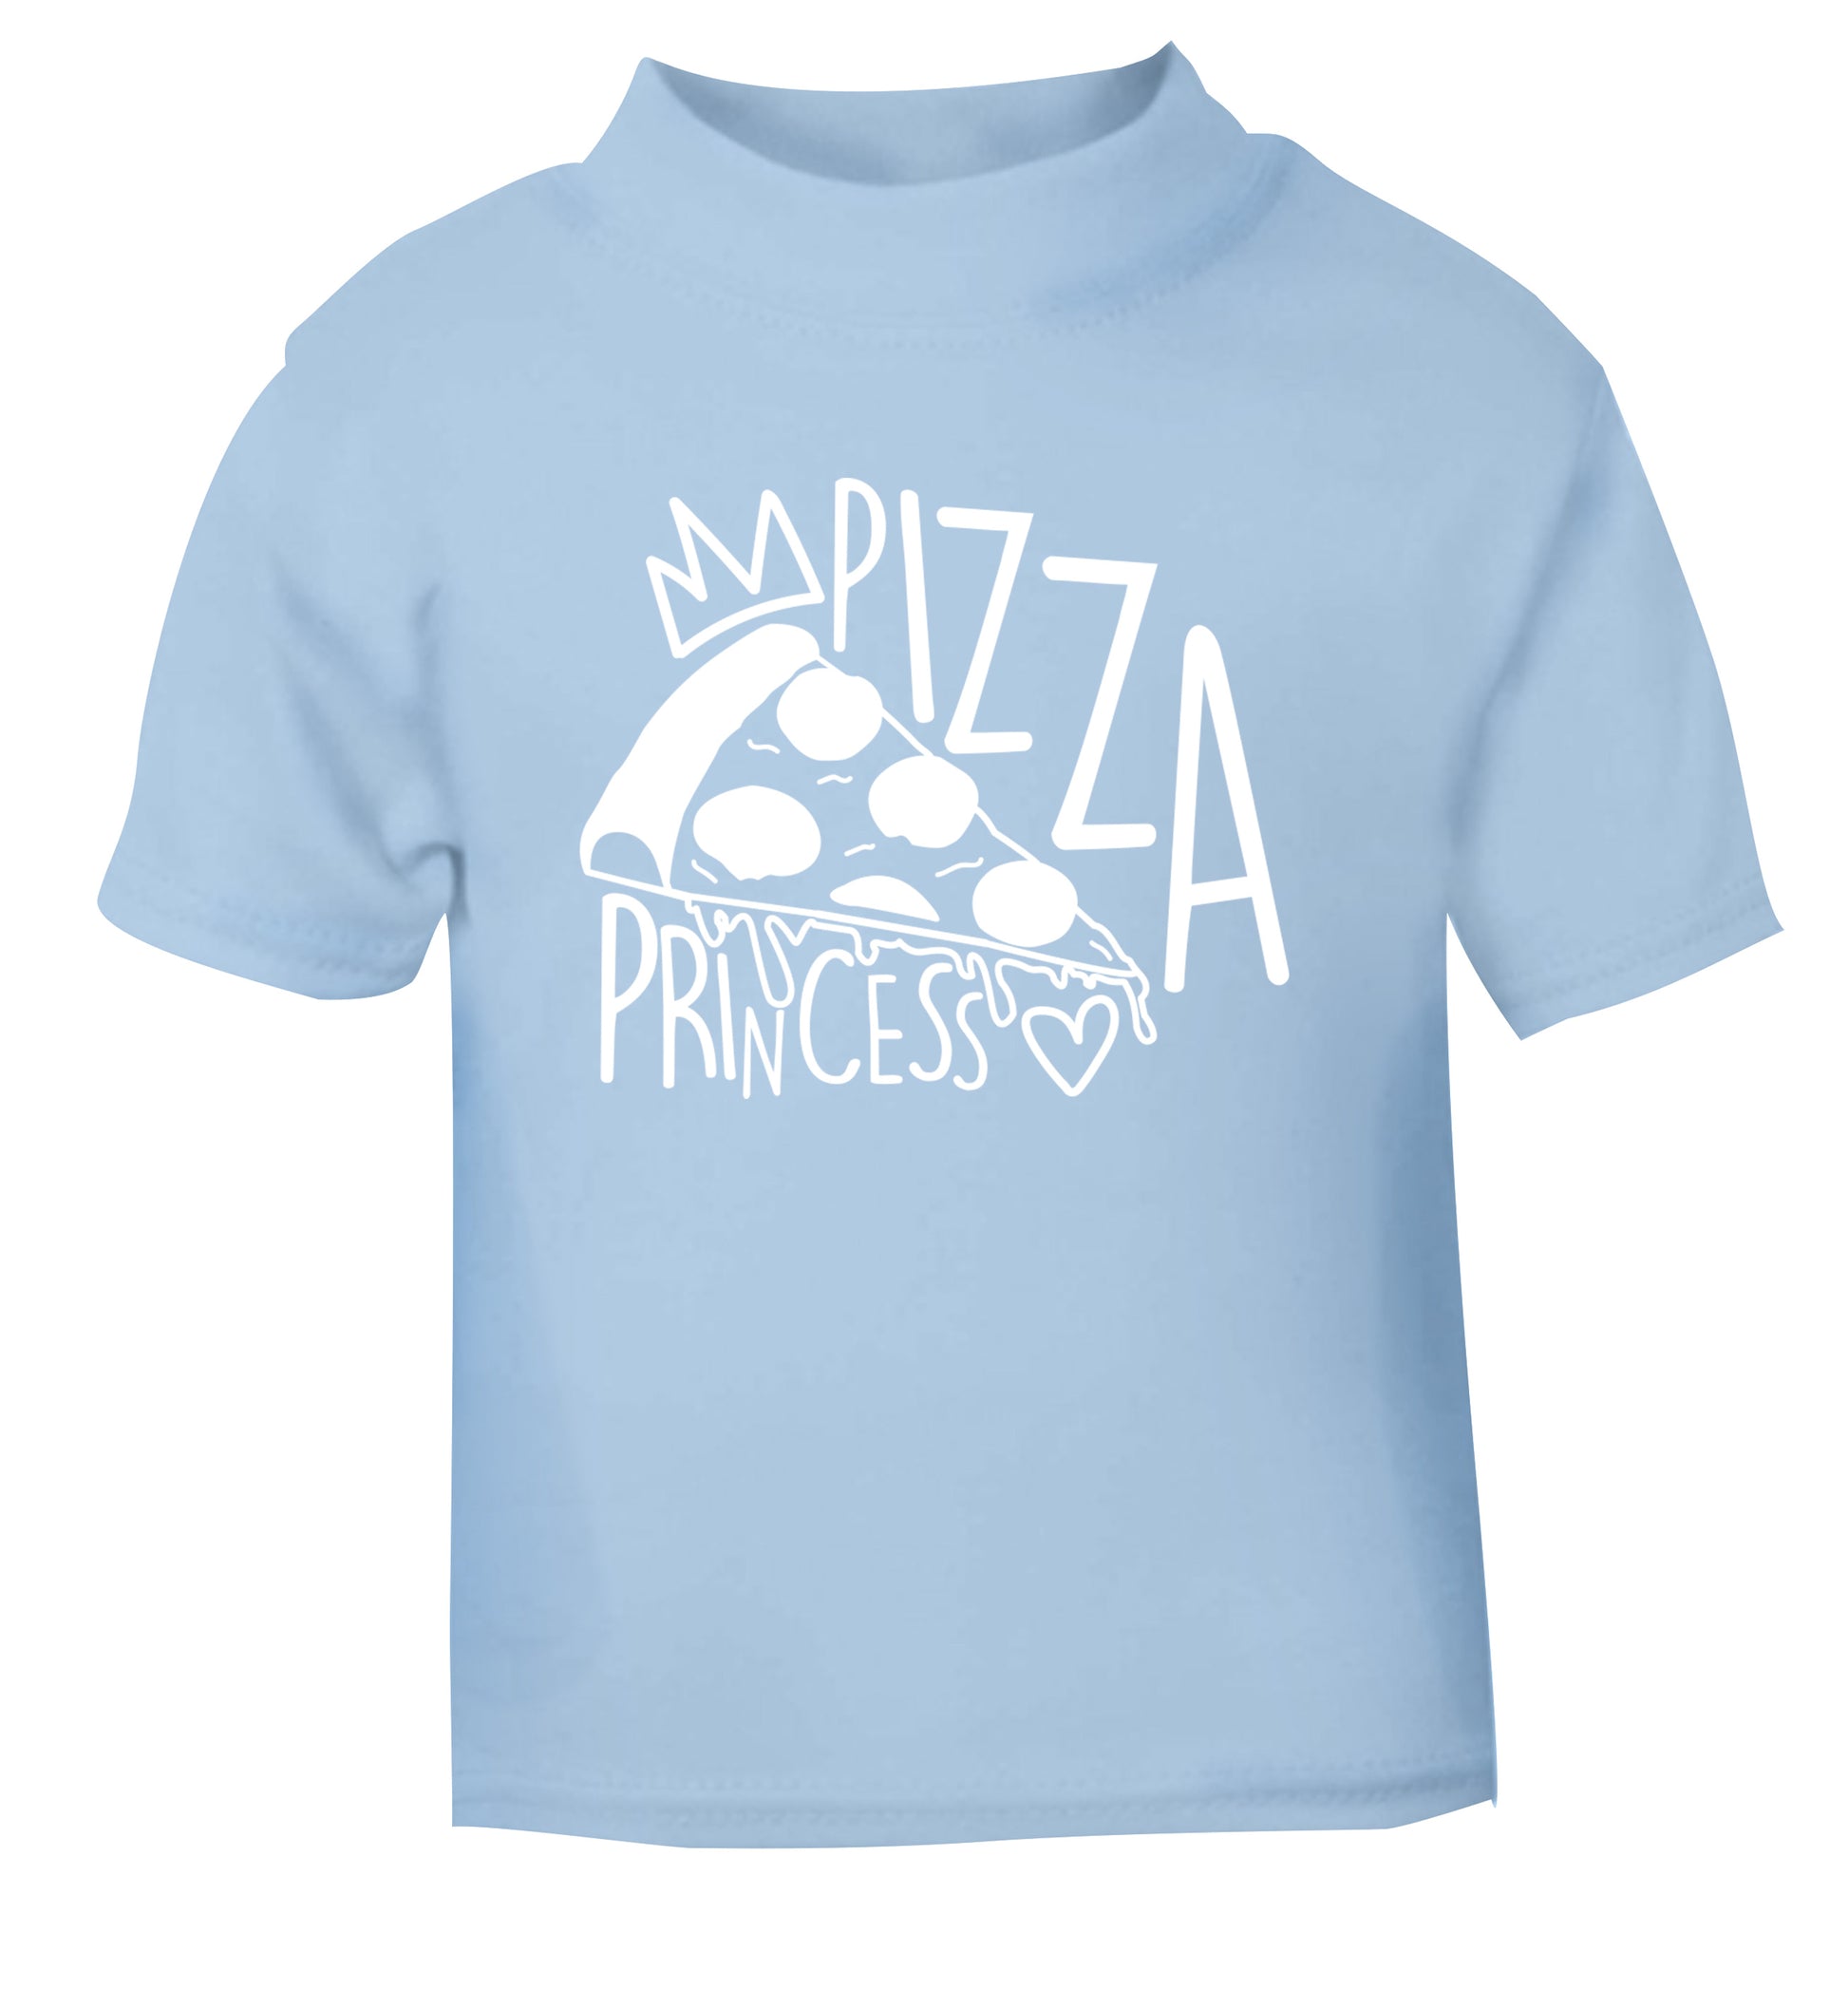 Pizza Princess light blue Baby Toddler Tshirt 2 Years